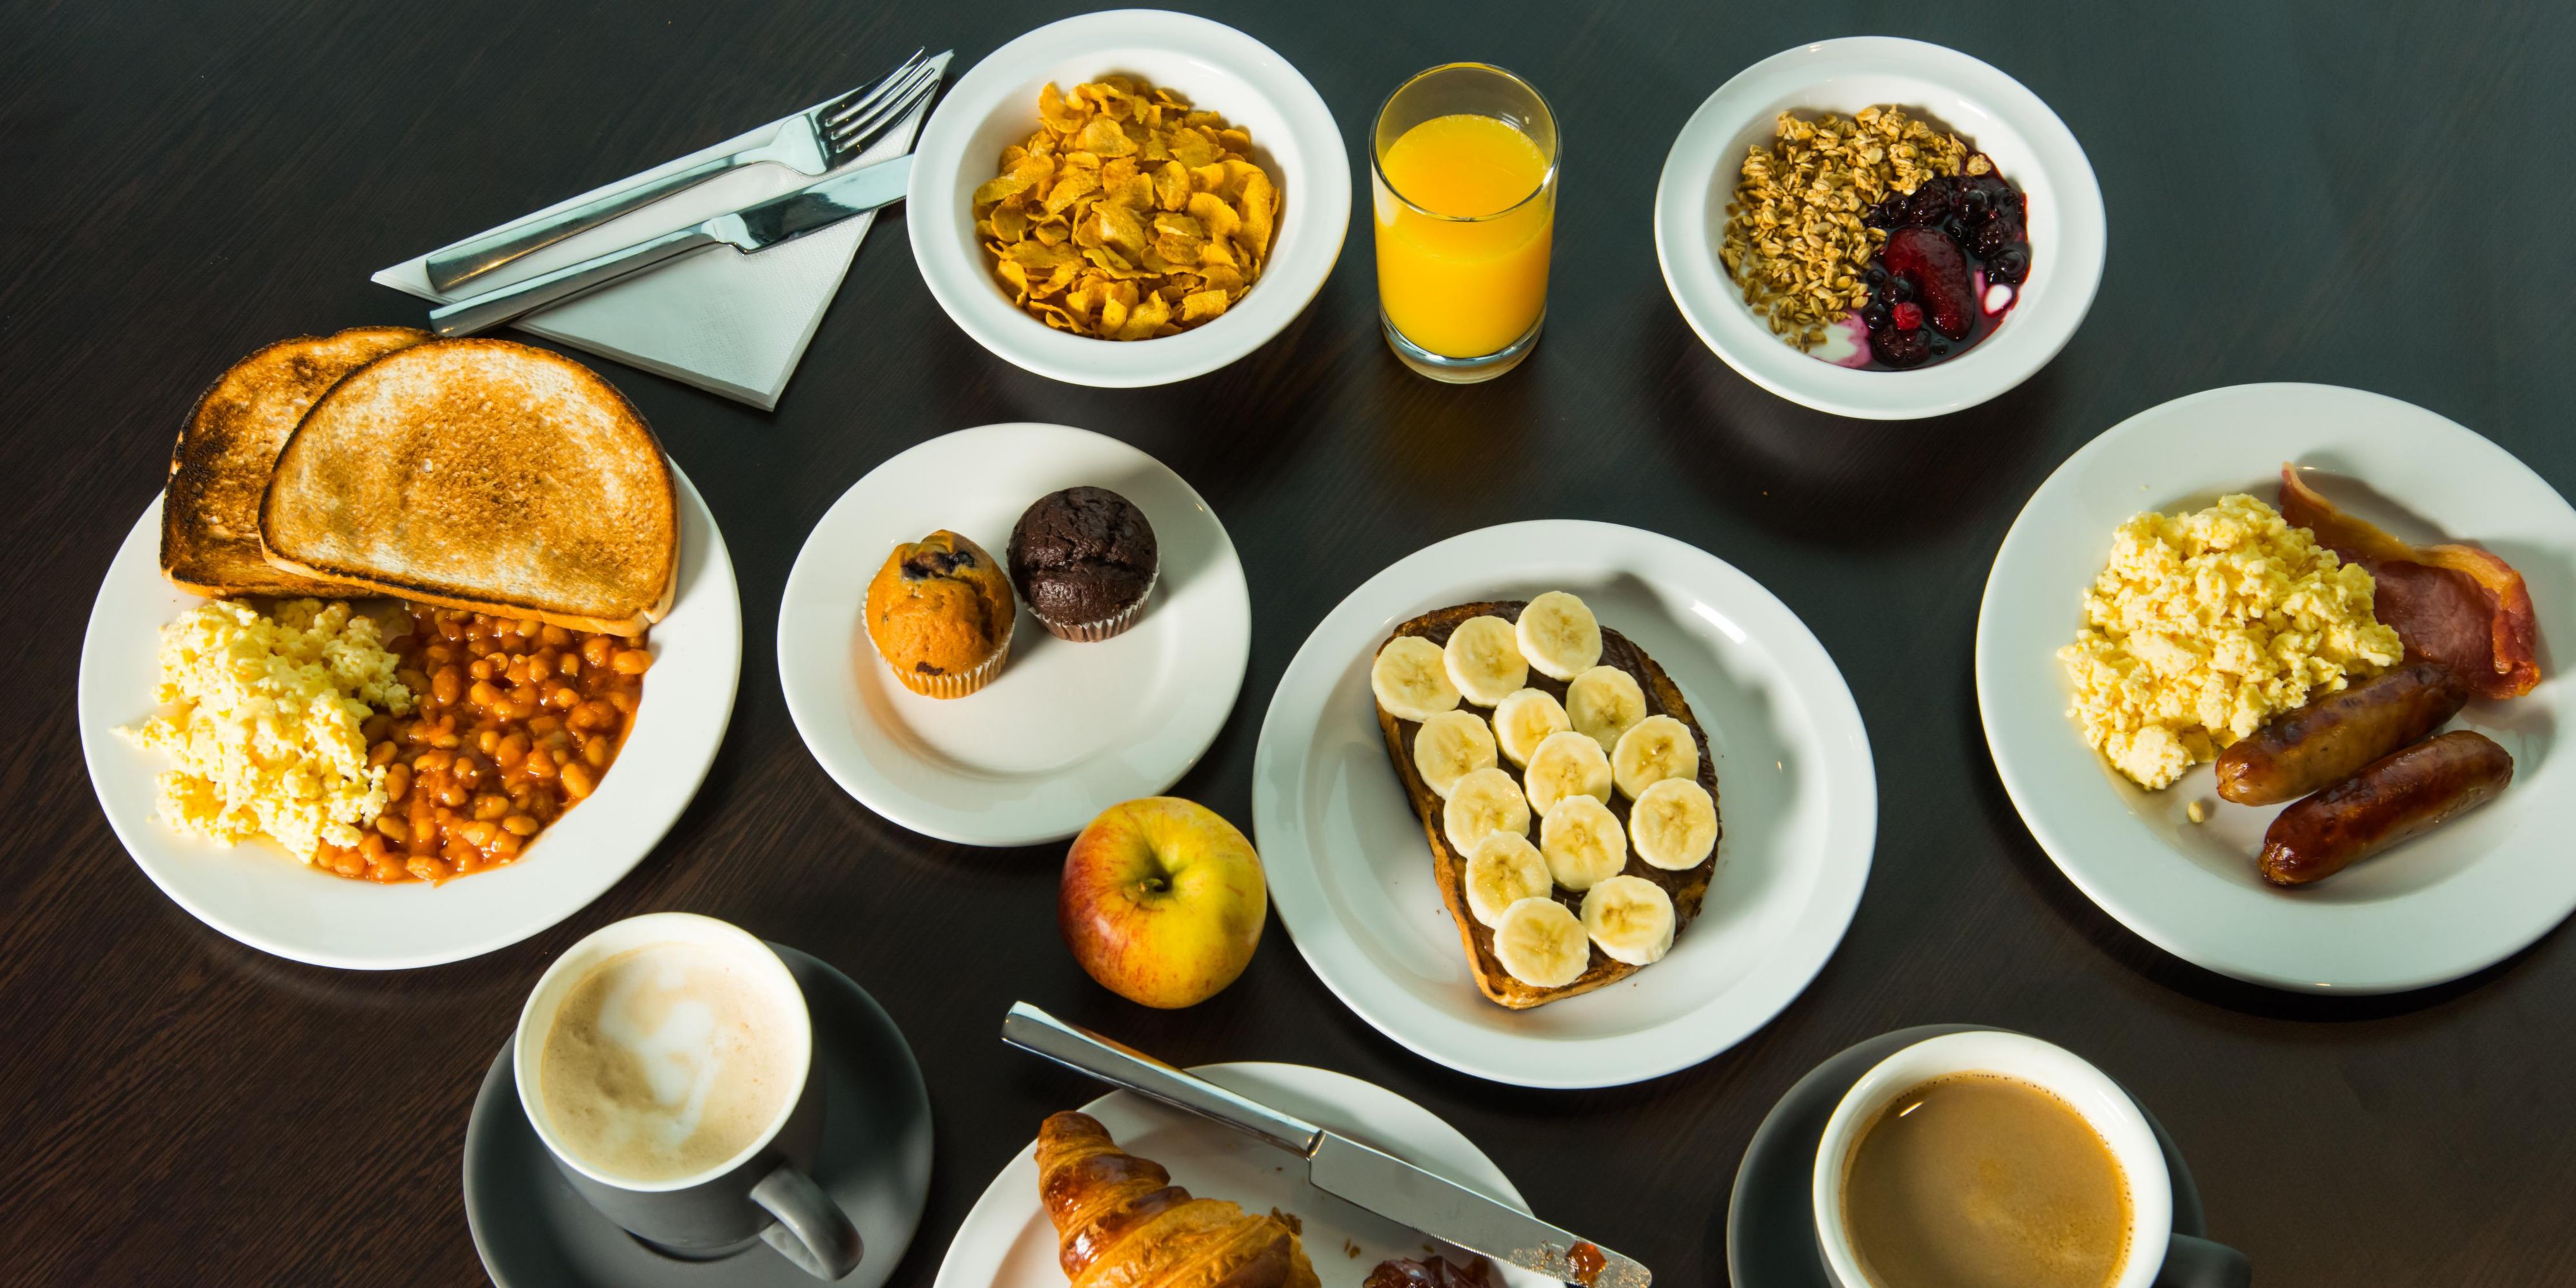 Kickstart your morning with our inclusive breakfast. Choose from a selection of hot and cold items like bacon, scrambled egg, sausages, toast and pastries. Grab & Go bags are available if you're in a hurry!